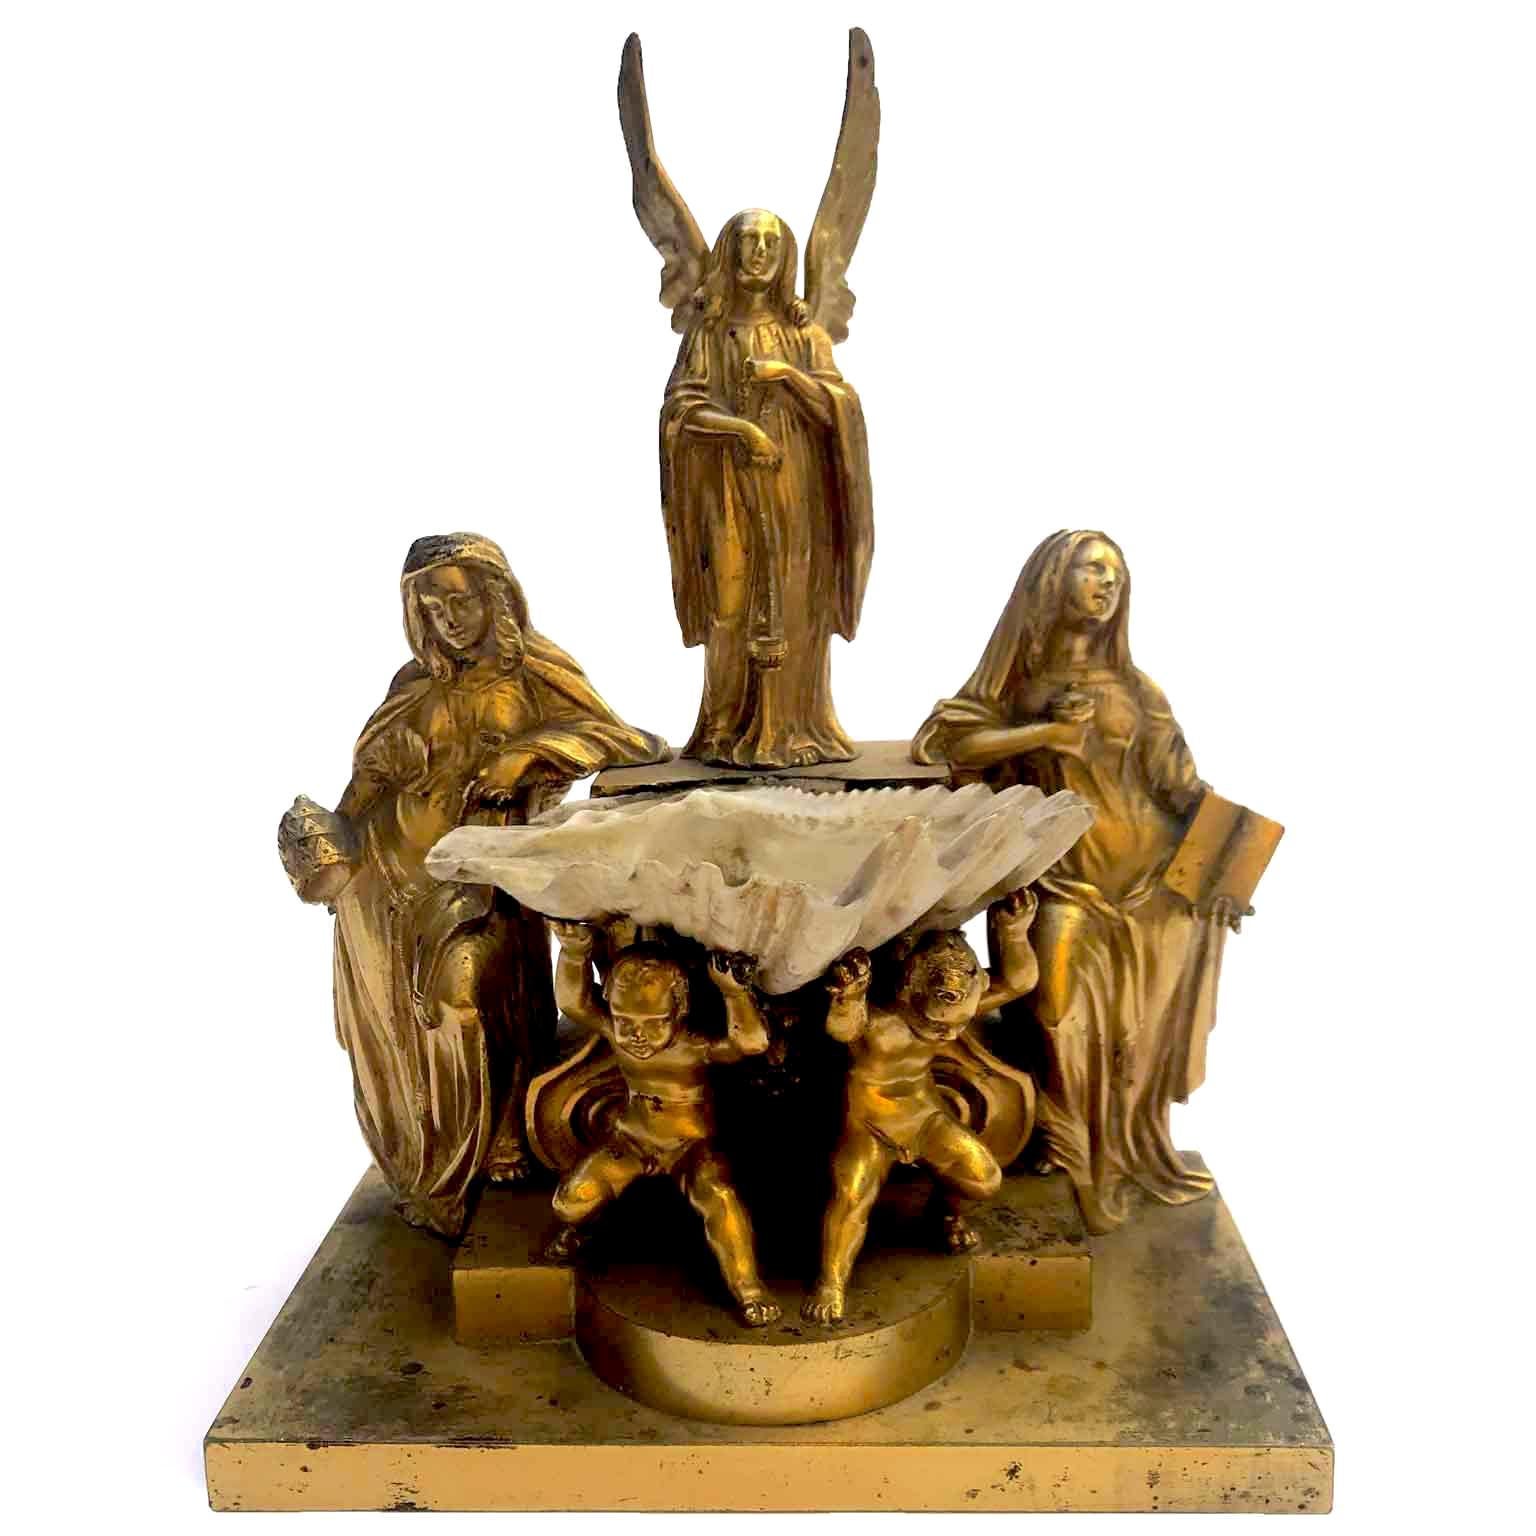 From Italy a stunning gilt bronze holy water font dating back to the first half of 19th century. An ormolu group sculpture depicting an unusual composition: on a stepped rectangular base two cherubs holding an original shell surmounted by a winged